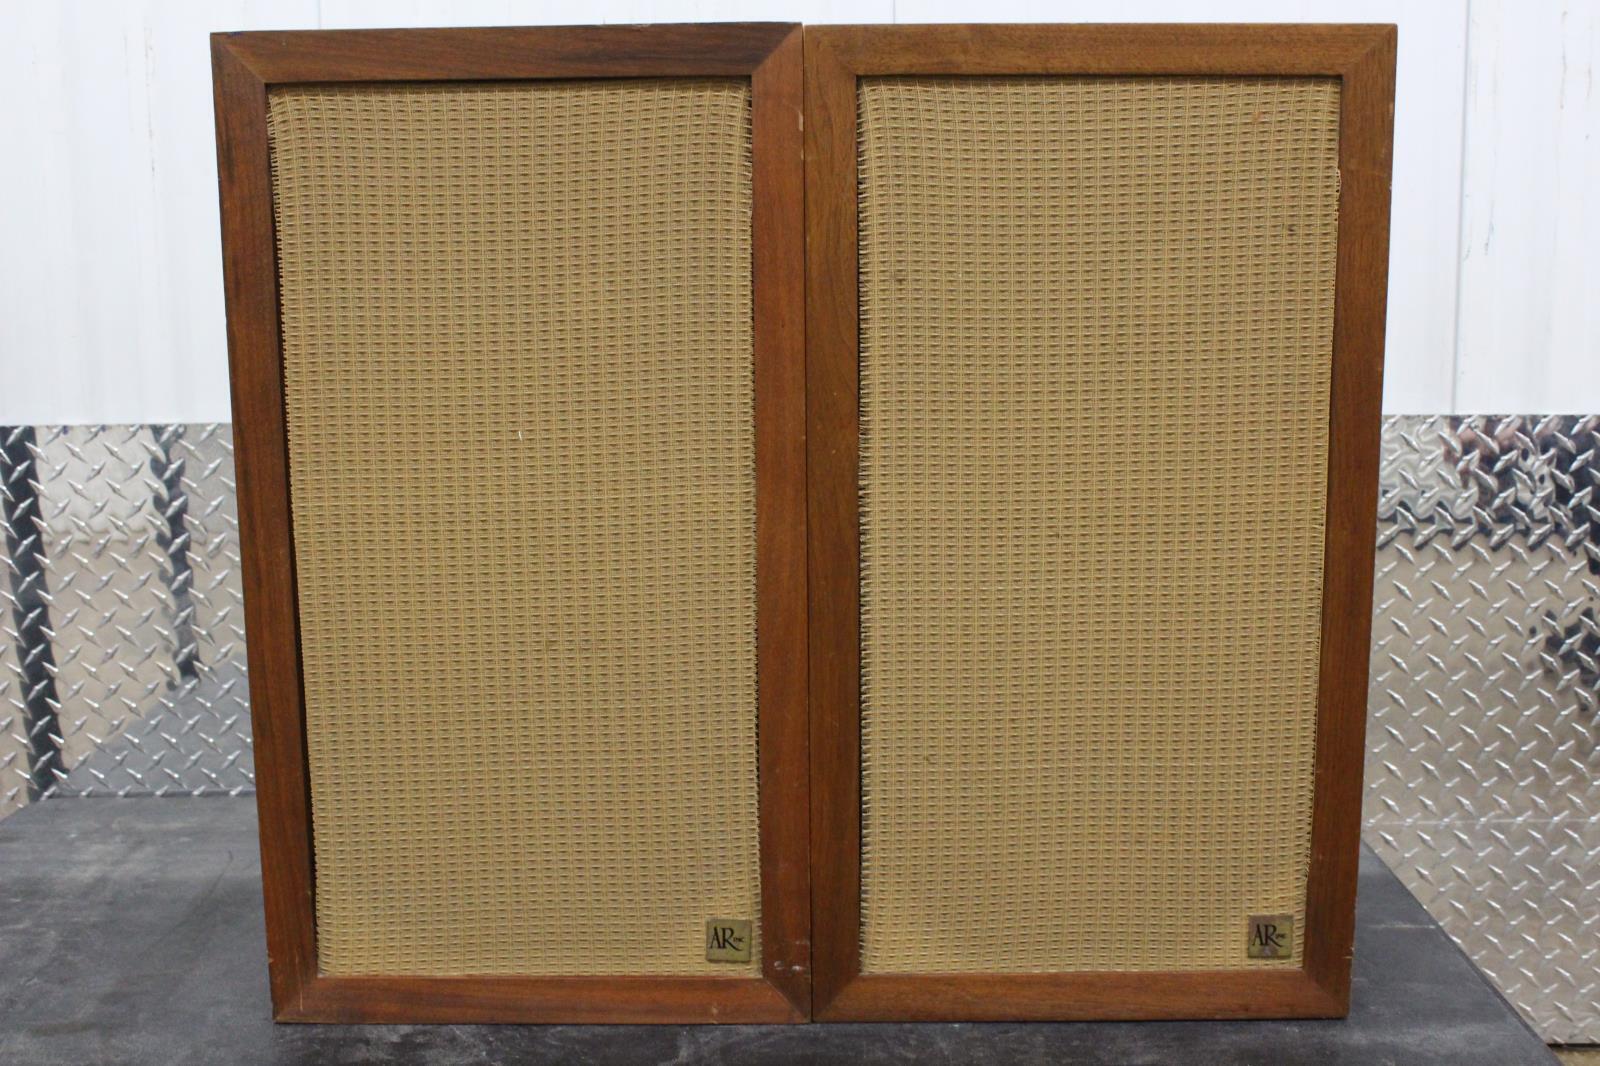 Vintage Acoustic Research AR-3 Speakers Home Theater Loud Speakers Pair New Pics